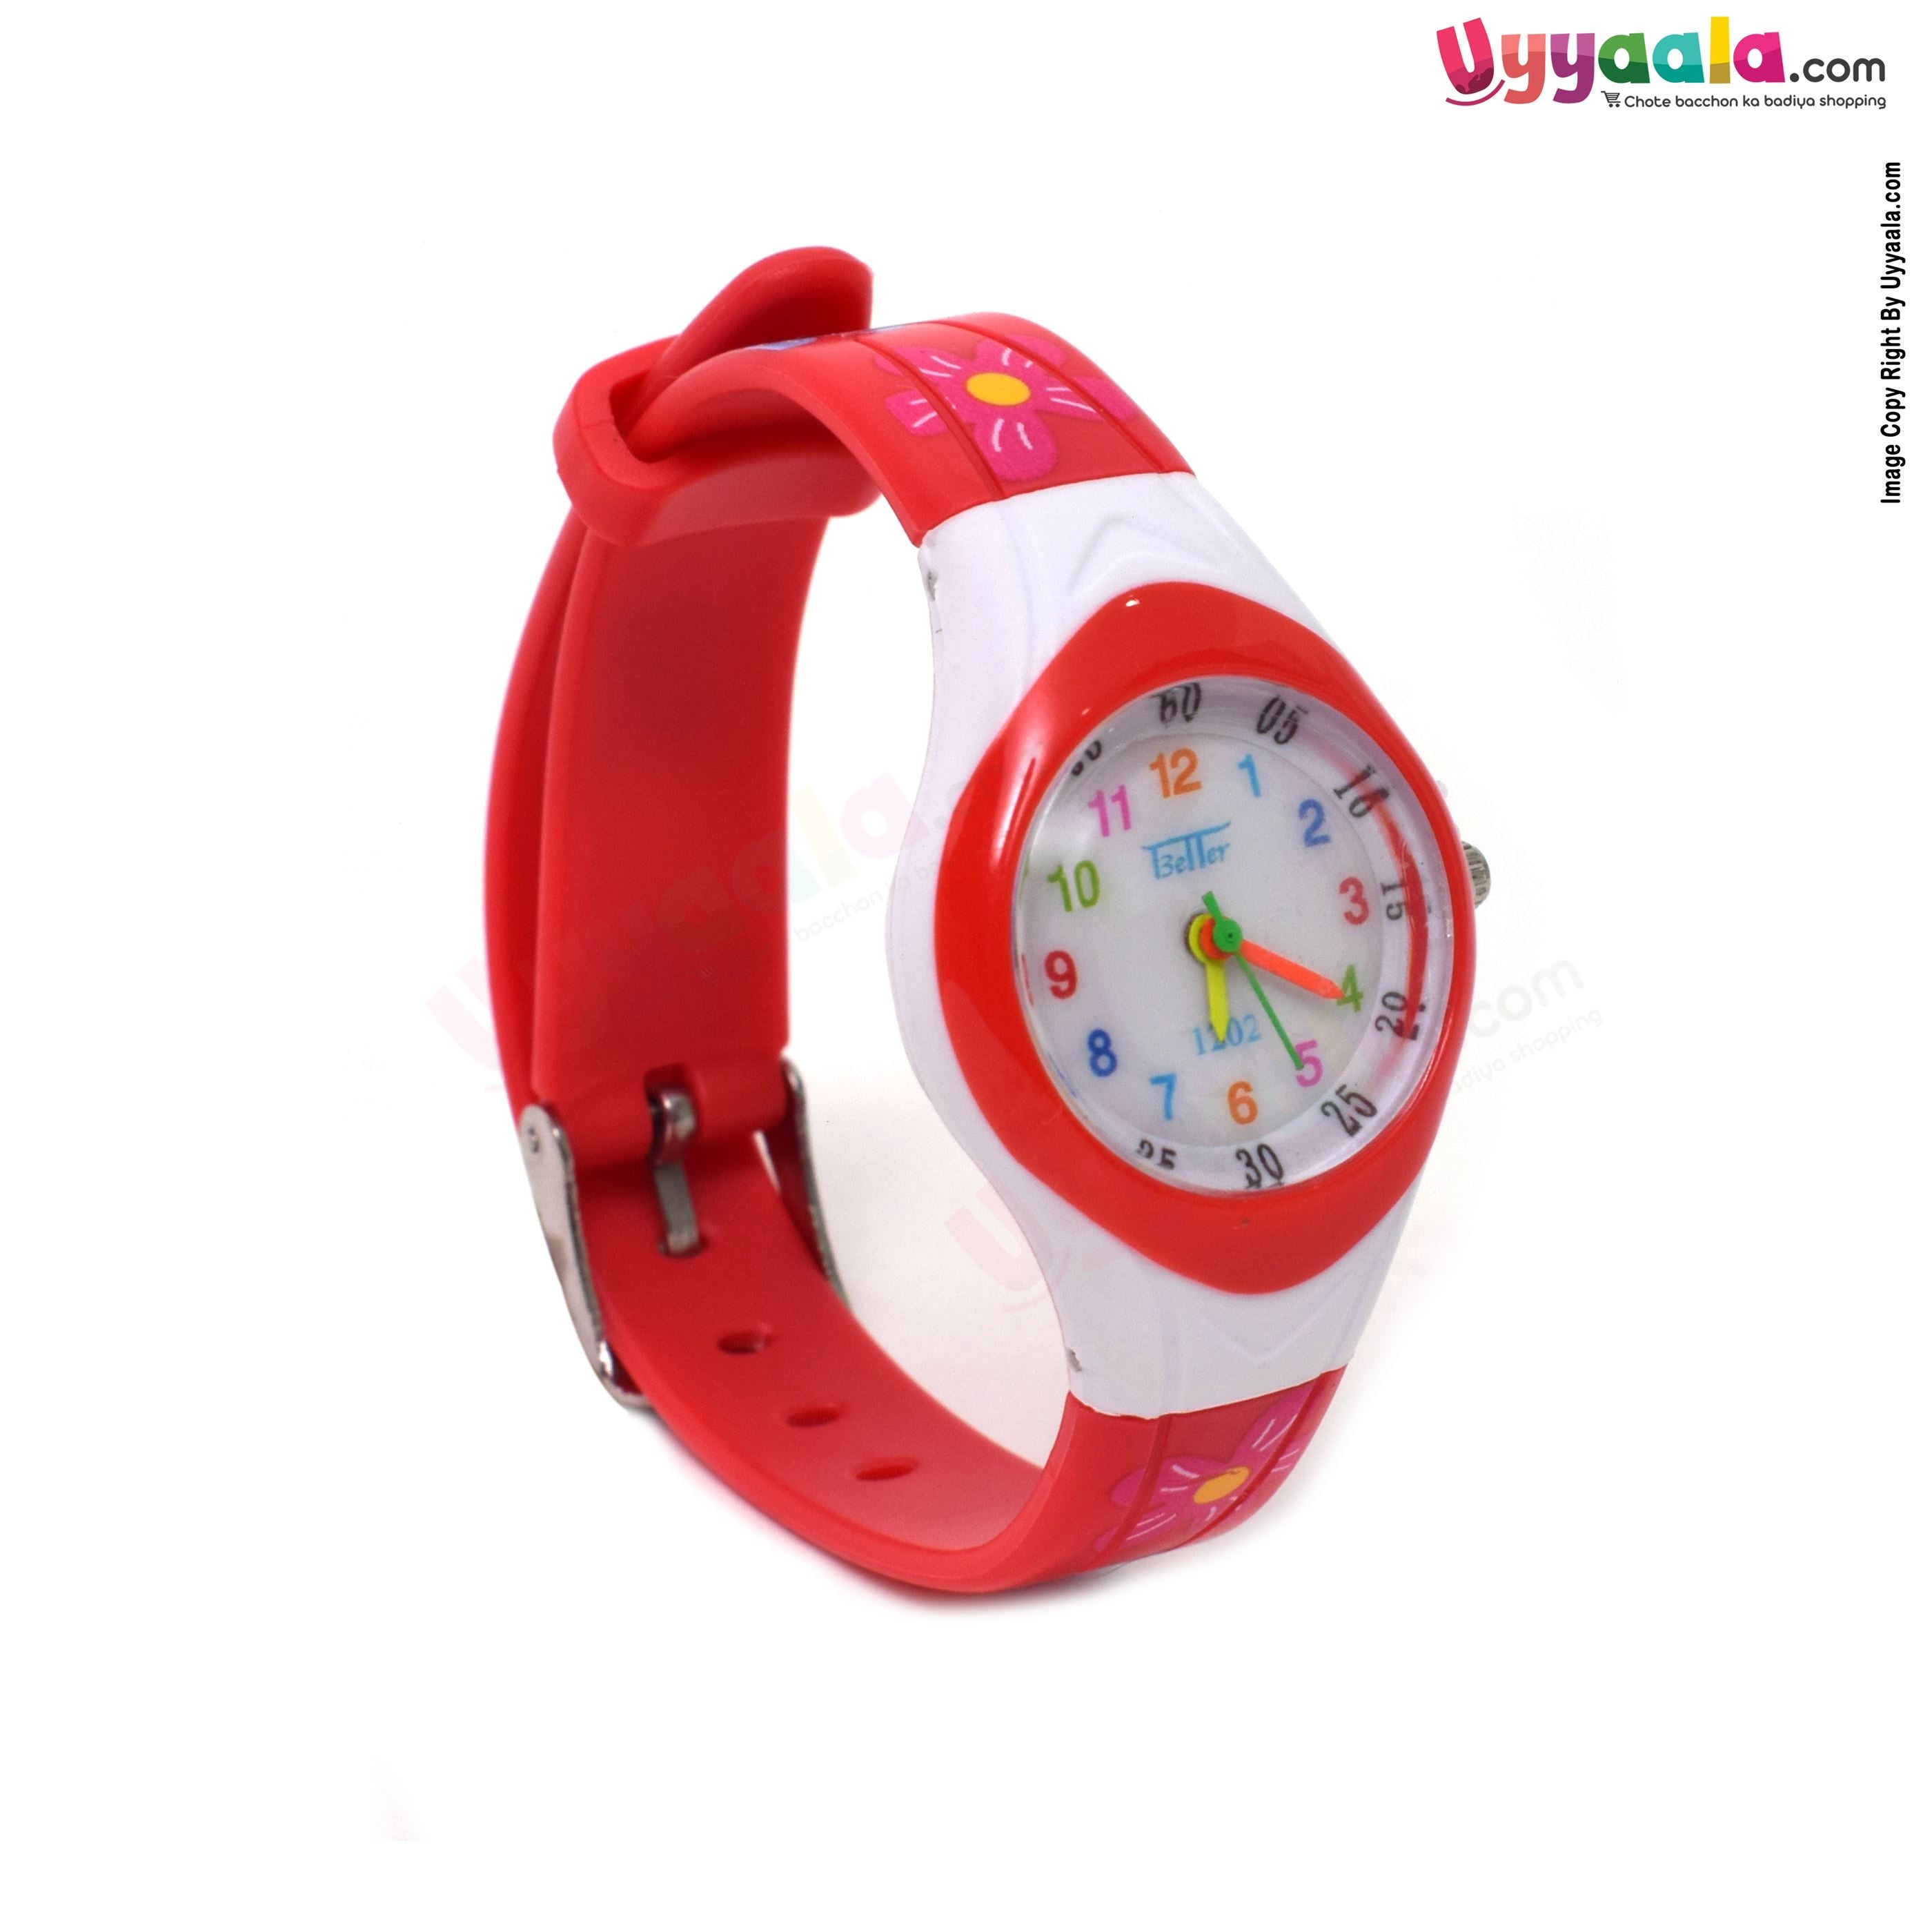 White analog wrist watch for kids - red strap with flower print